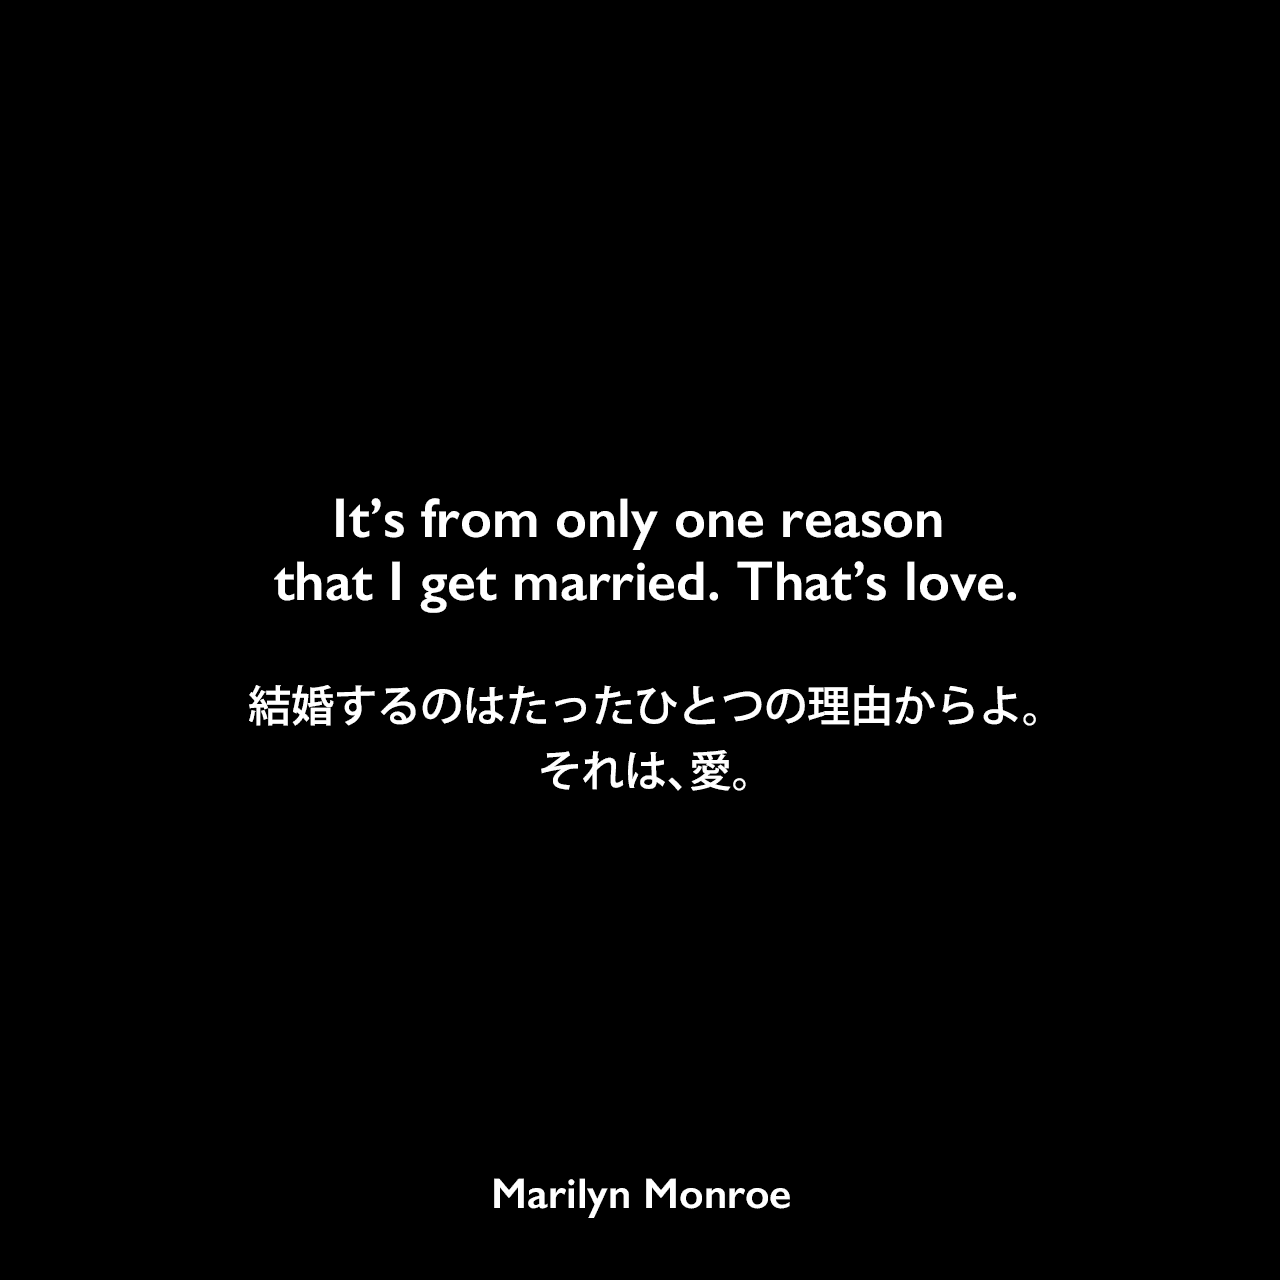 It’s from only one reason that I get married. That’s love.結婚するのはたったひとつの理由からよ。それは、愛。Marilyn Monroe